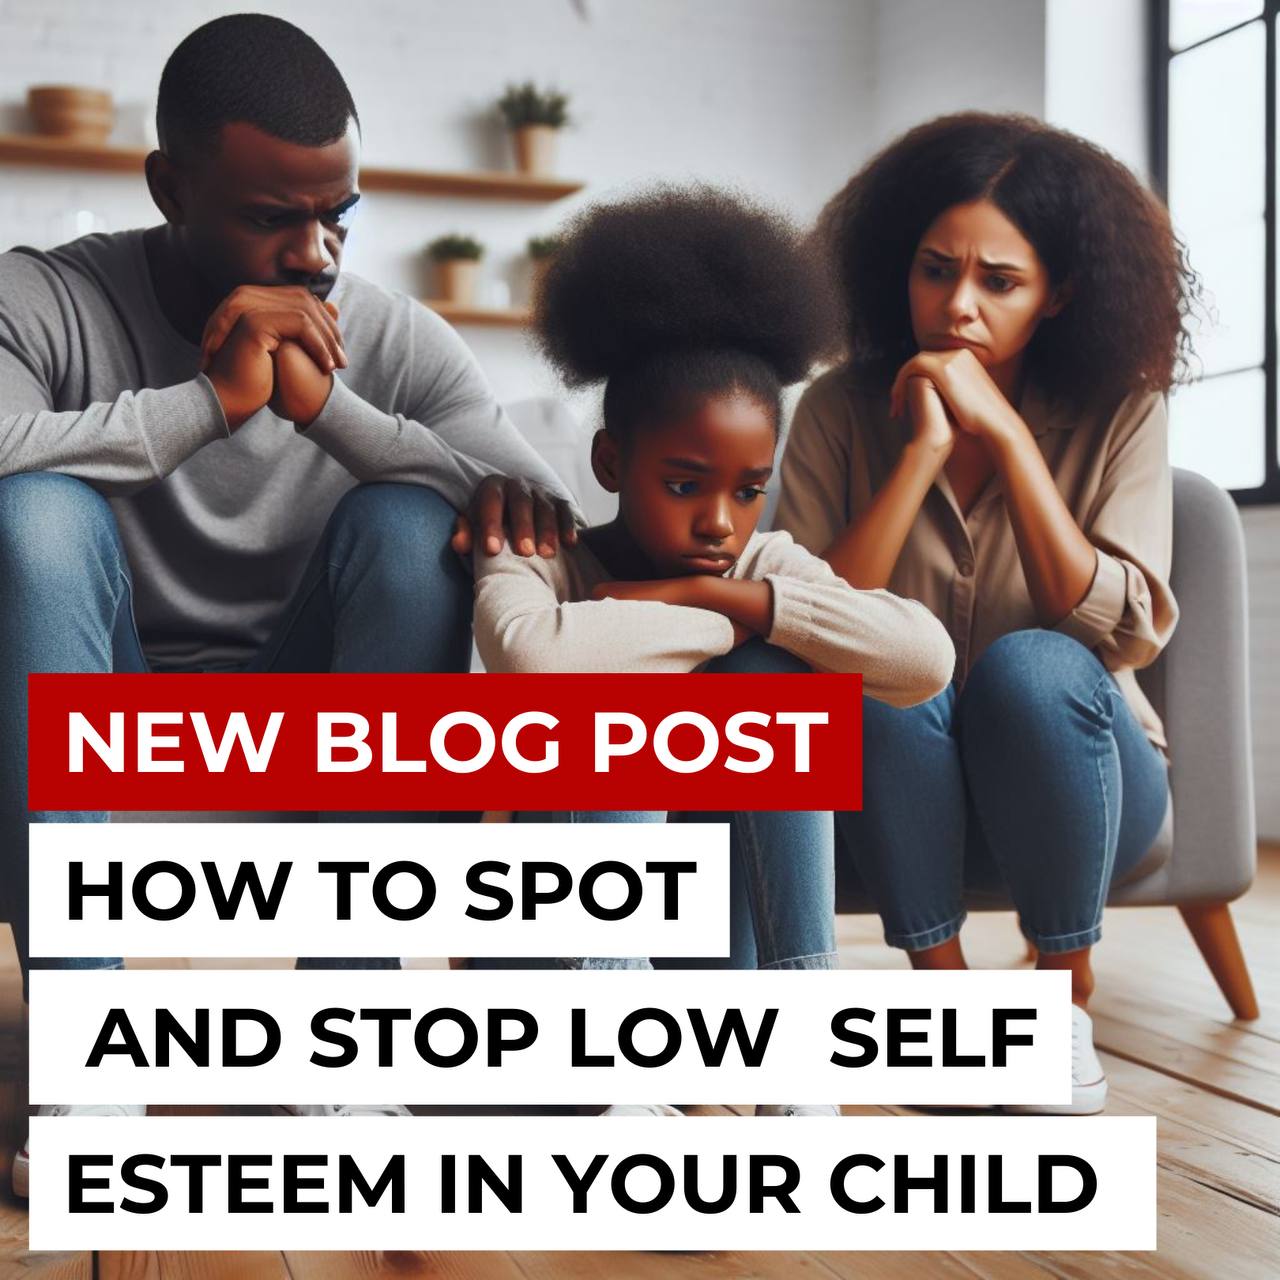 How to Spot and Stop Low Self-Esteem in Your Child